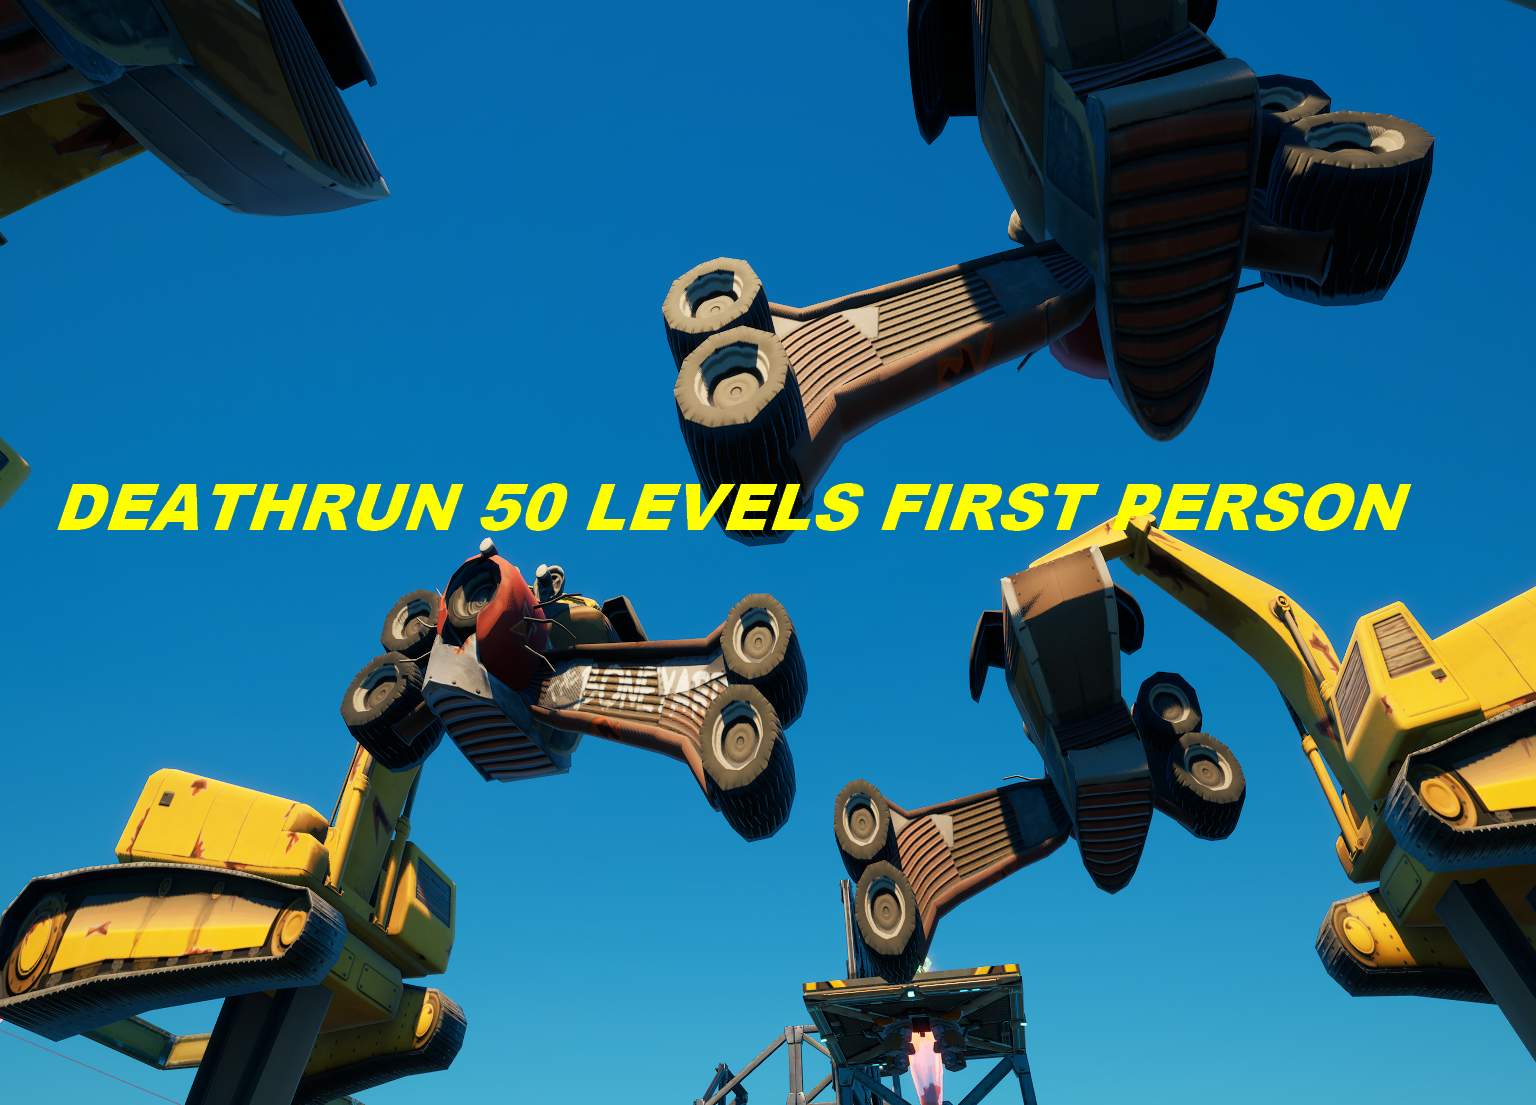 Deathrun First Person 50 Levels